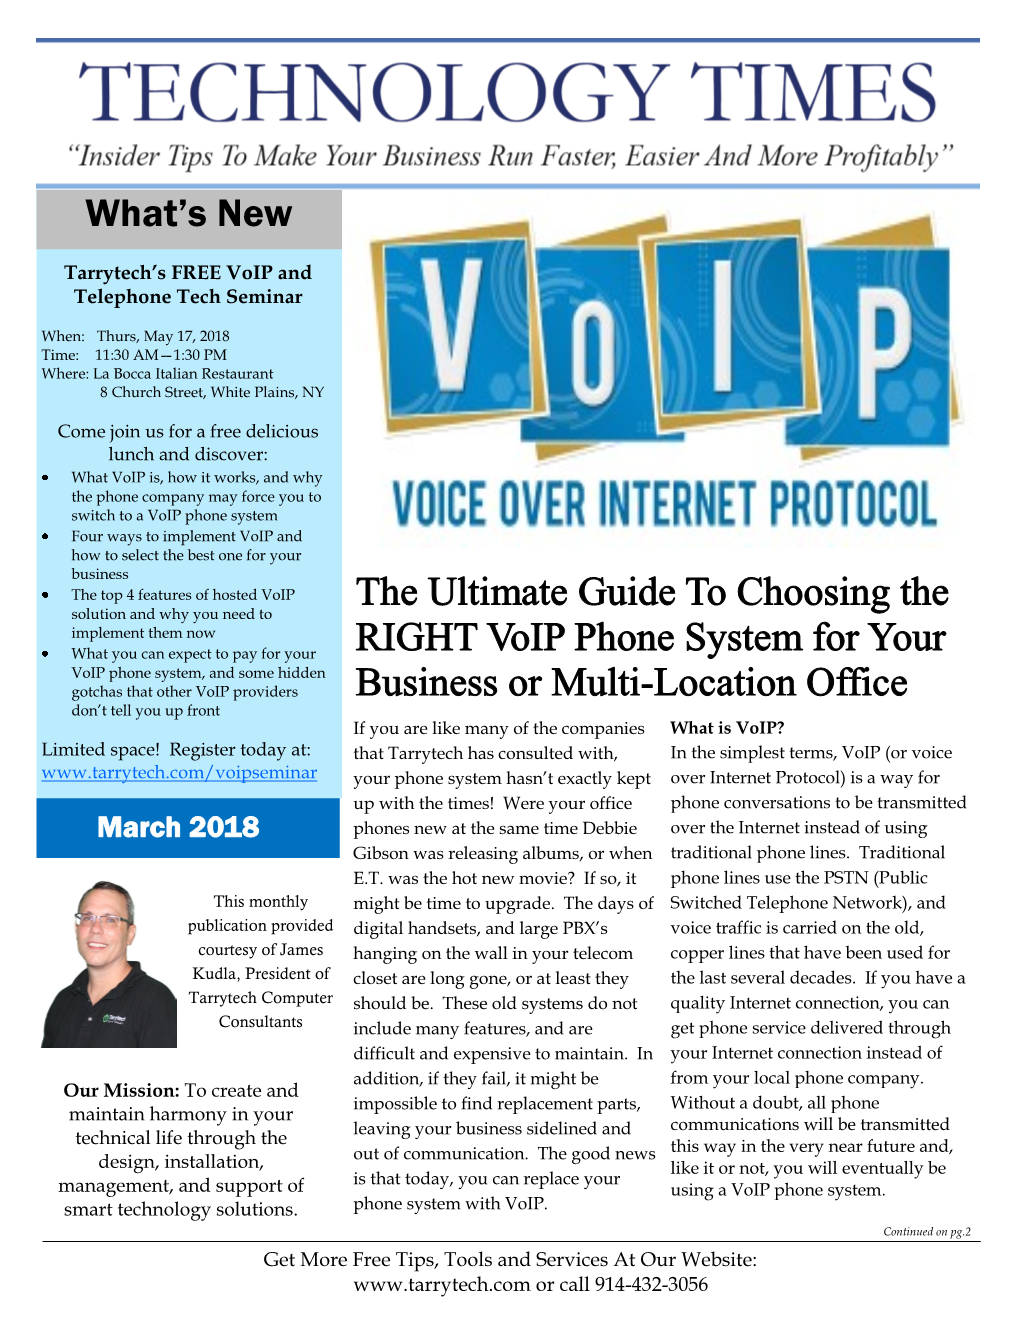 What's New the Ultimate Guide to Choosing the RIGHT Voip Phone